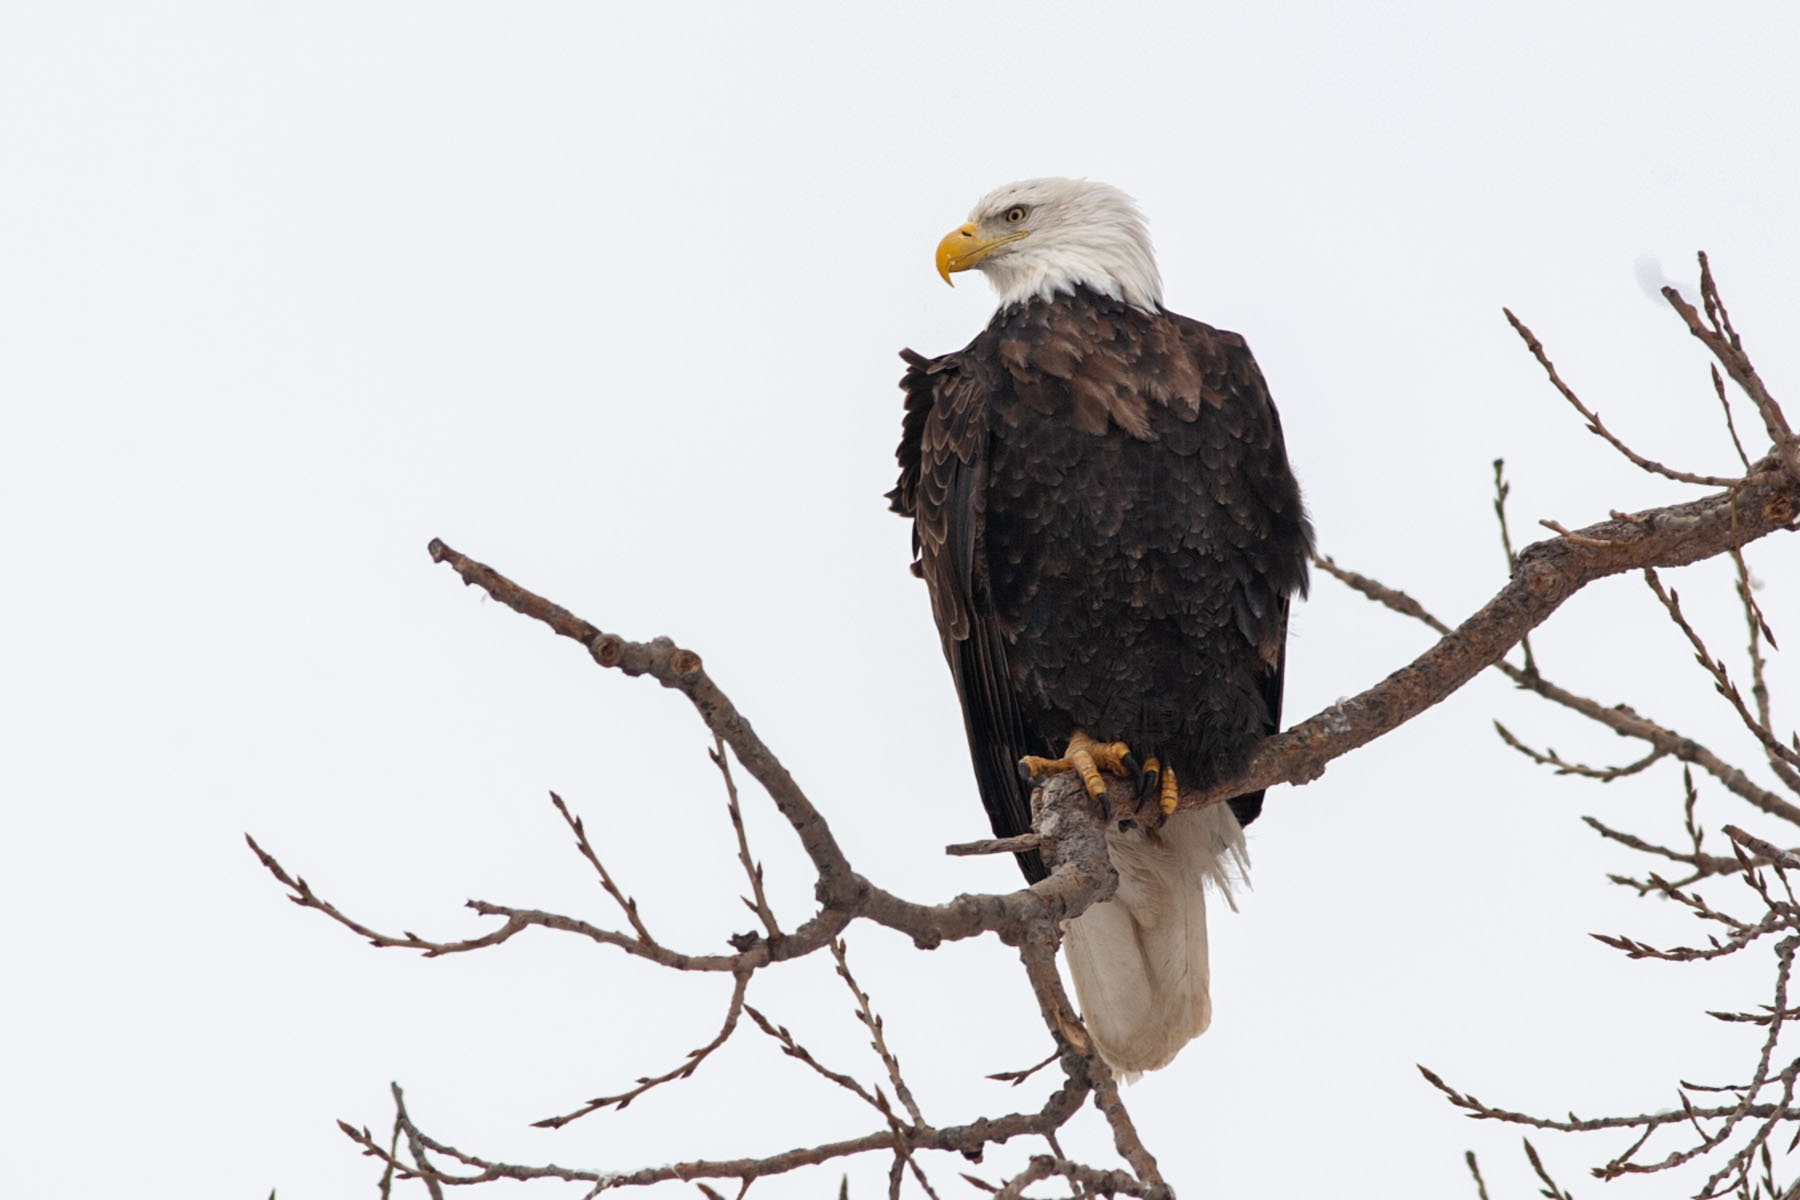 Keeping an eagle eye on what's going on down on the river.  Click for next photo.